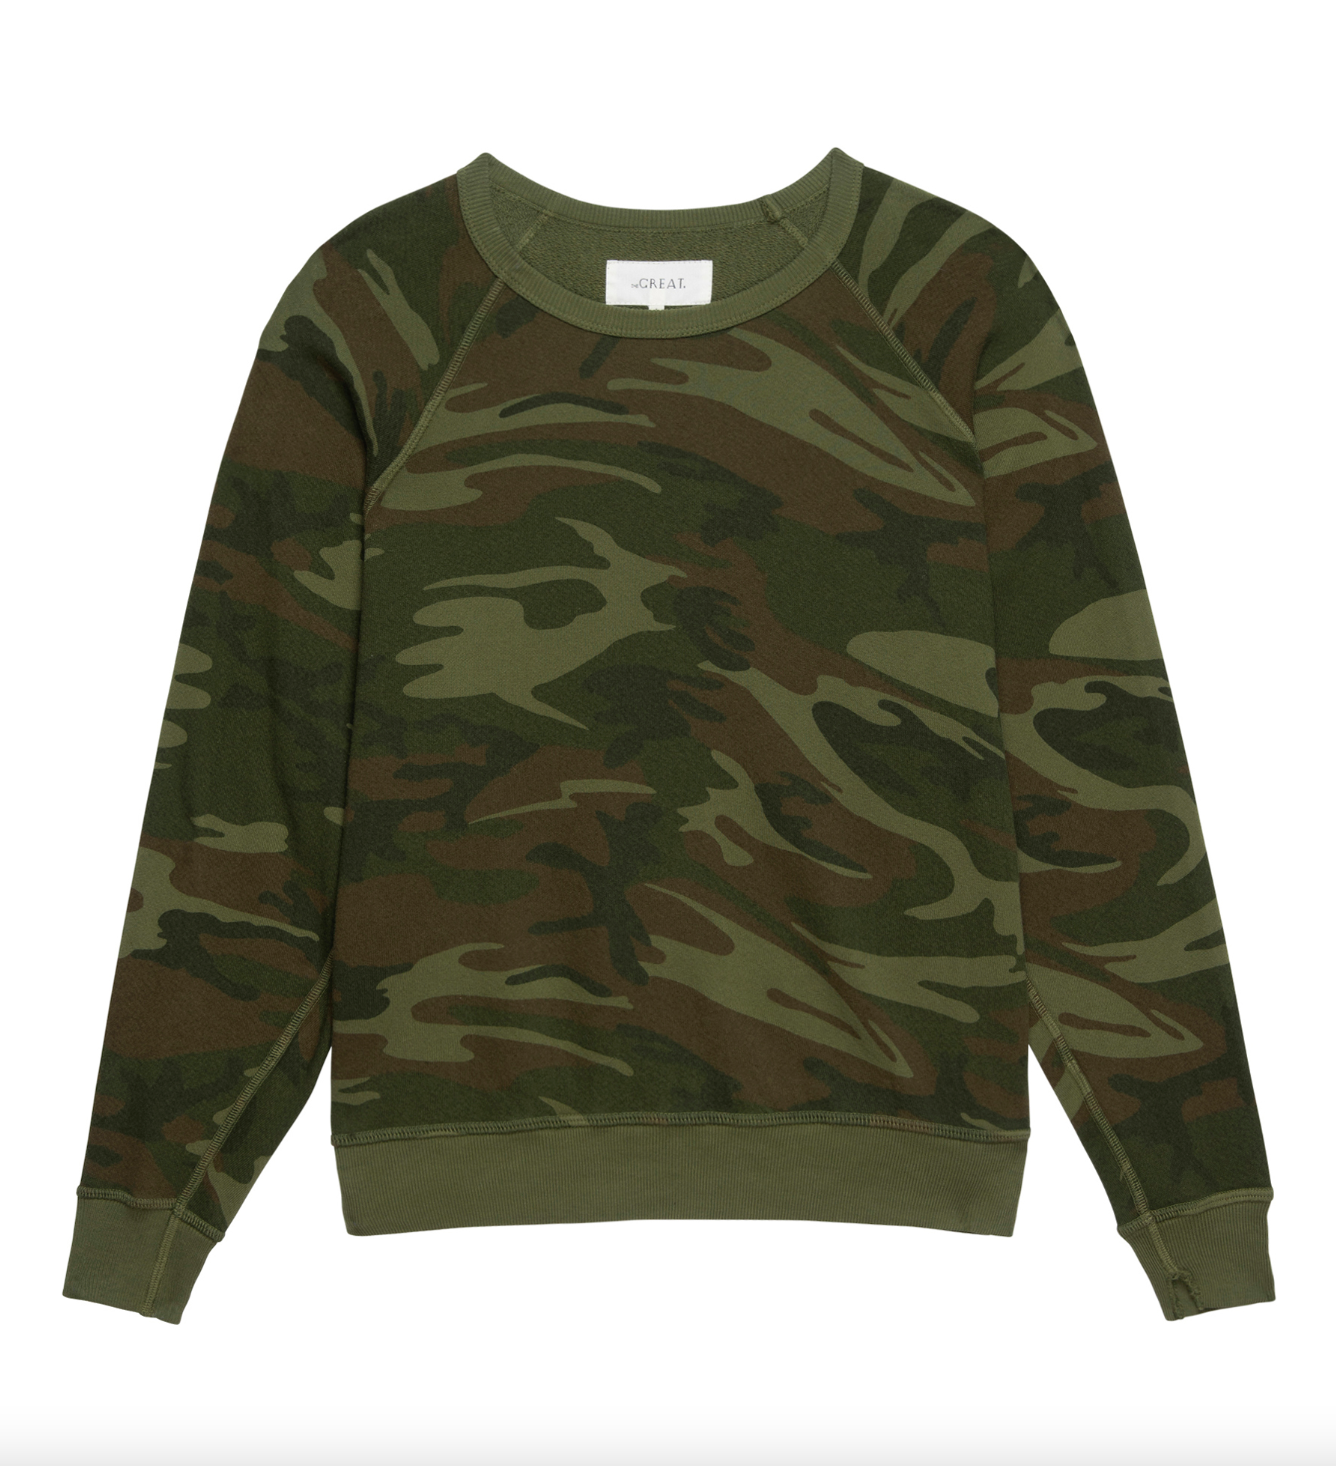 A camouflage-style sweatshirt with long sleeves and a crew neck, featuring shades of green, brown, and black. The label at the neckline shows the brand "The Great Inc.